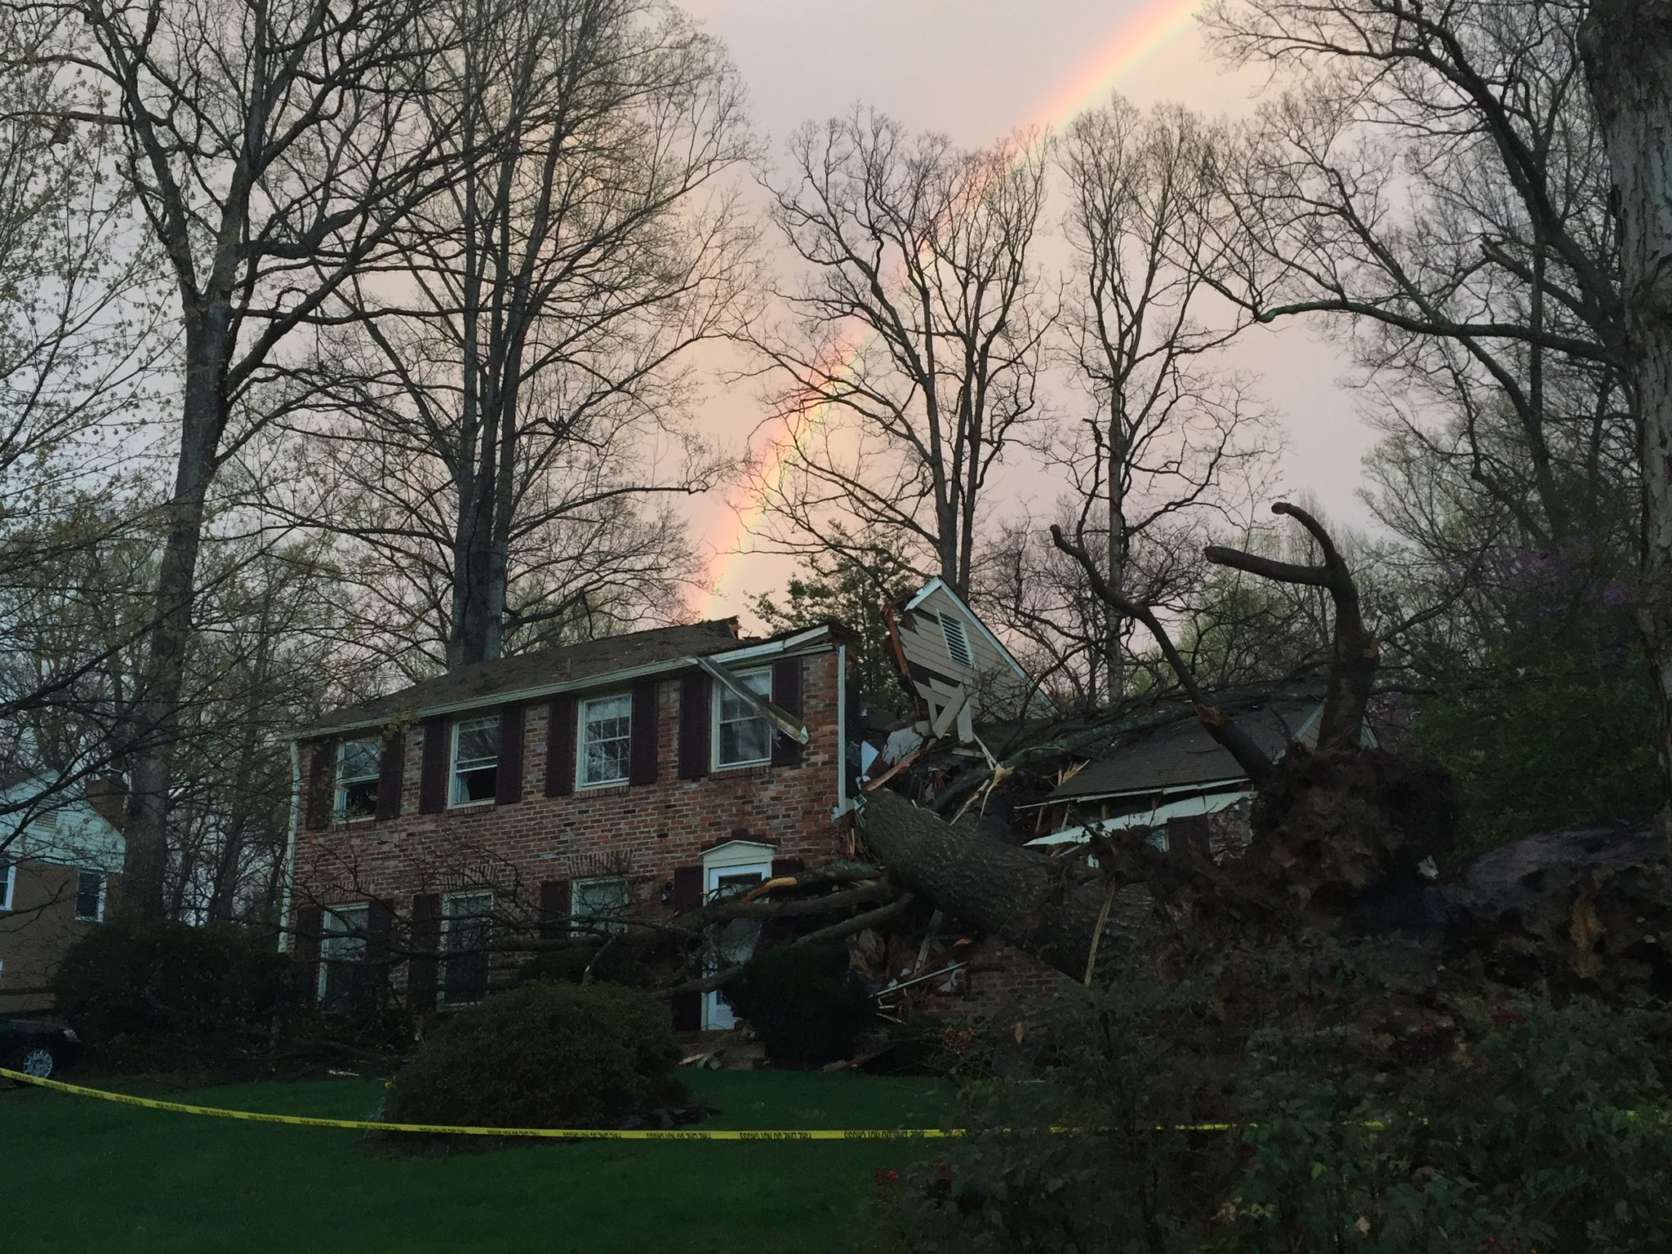 "A rainbow just briefly appeared above the destruction here on Toll House Road in Annandale." (WTOP/Michelle Basch)